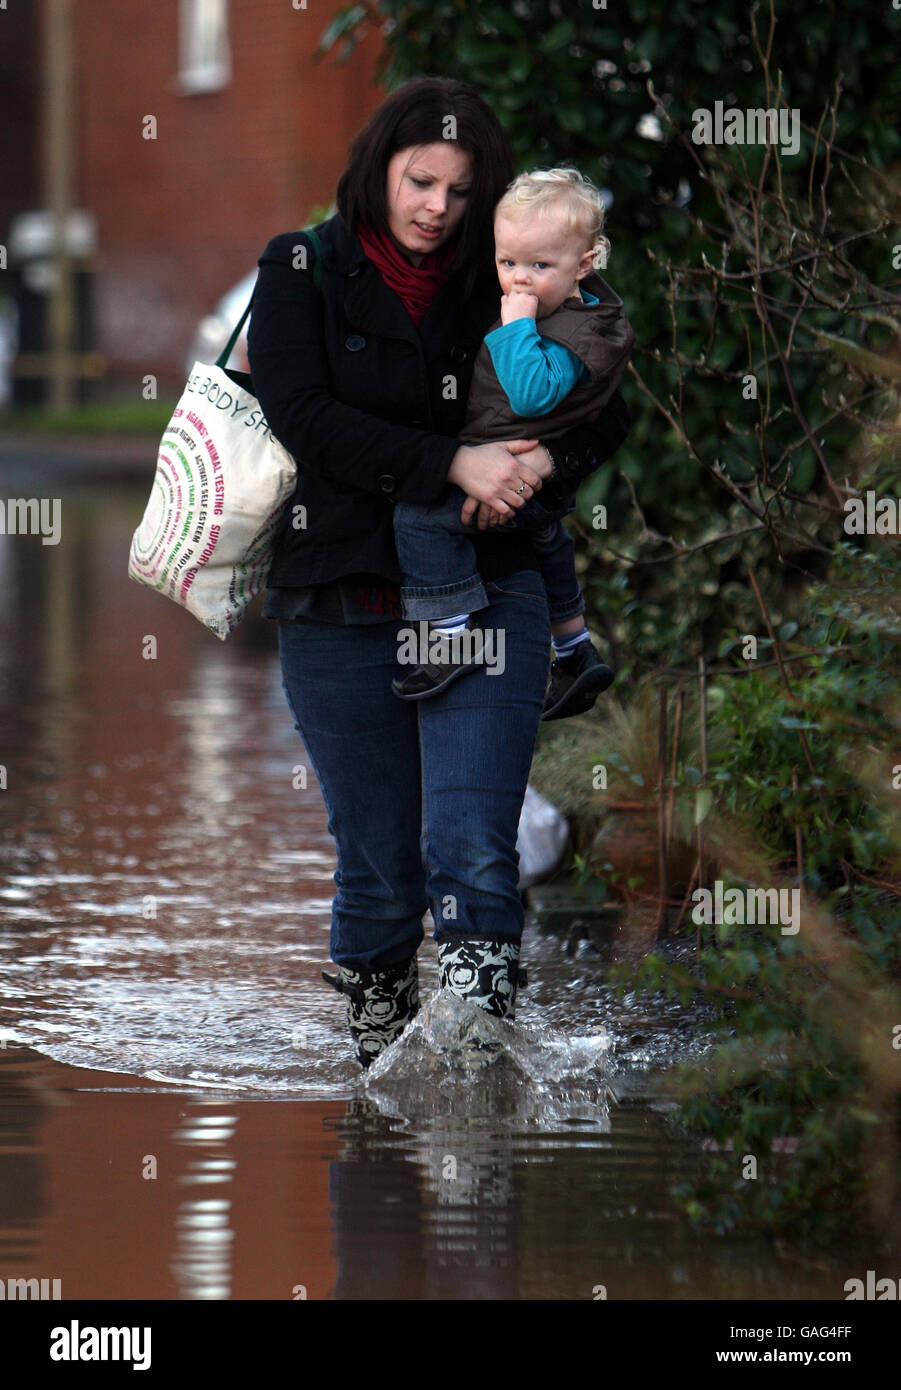 Continuing flooding in UK. A resident of New Street in Upton makes her way home through the floods. Stock Photo